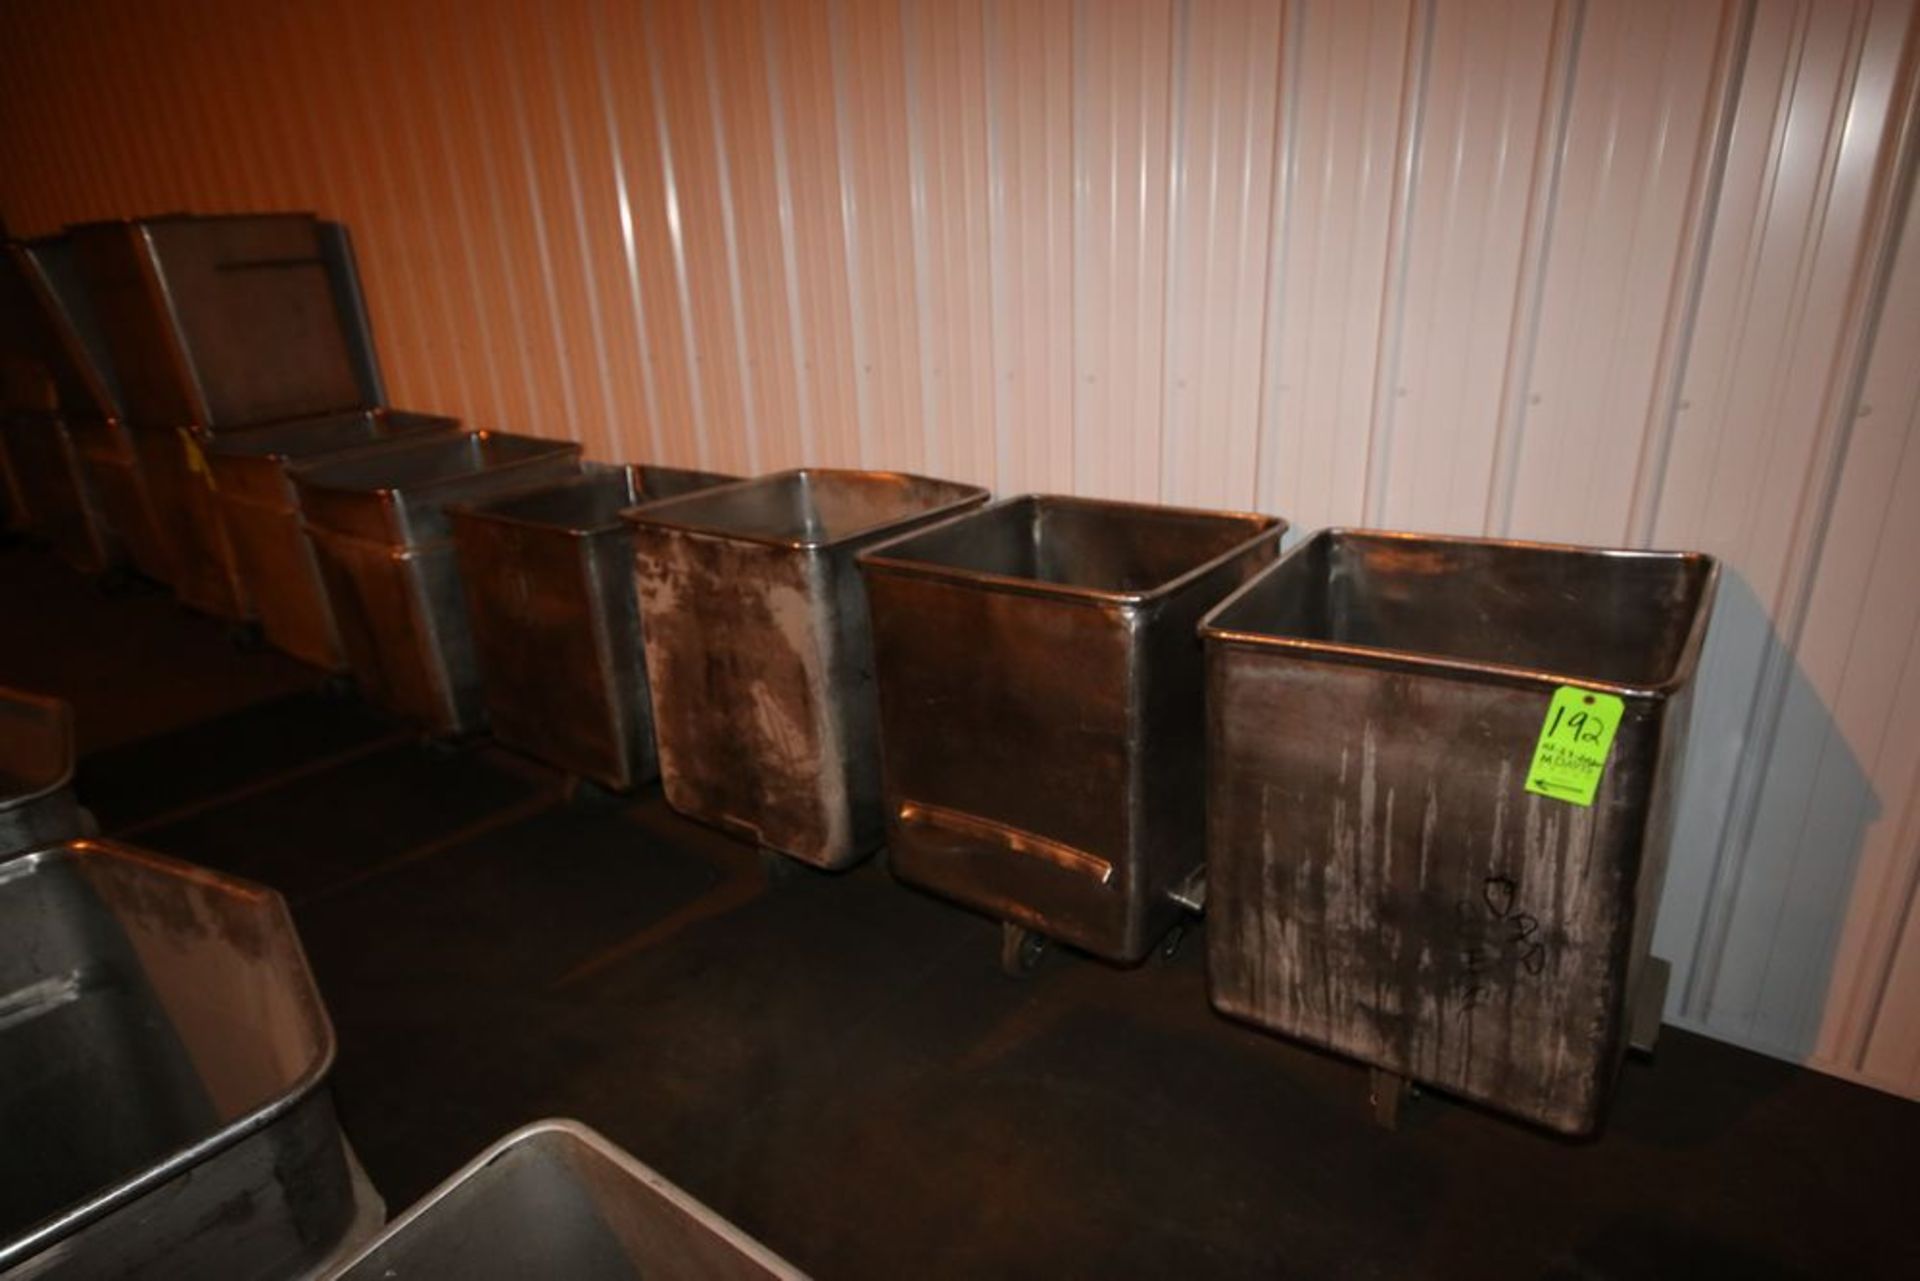 S/S Portable Totes, Internal Dims.: Aprox. 25-1/2" L x 25" W x 30" Deep (LOCATED IN BROCKPORT,